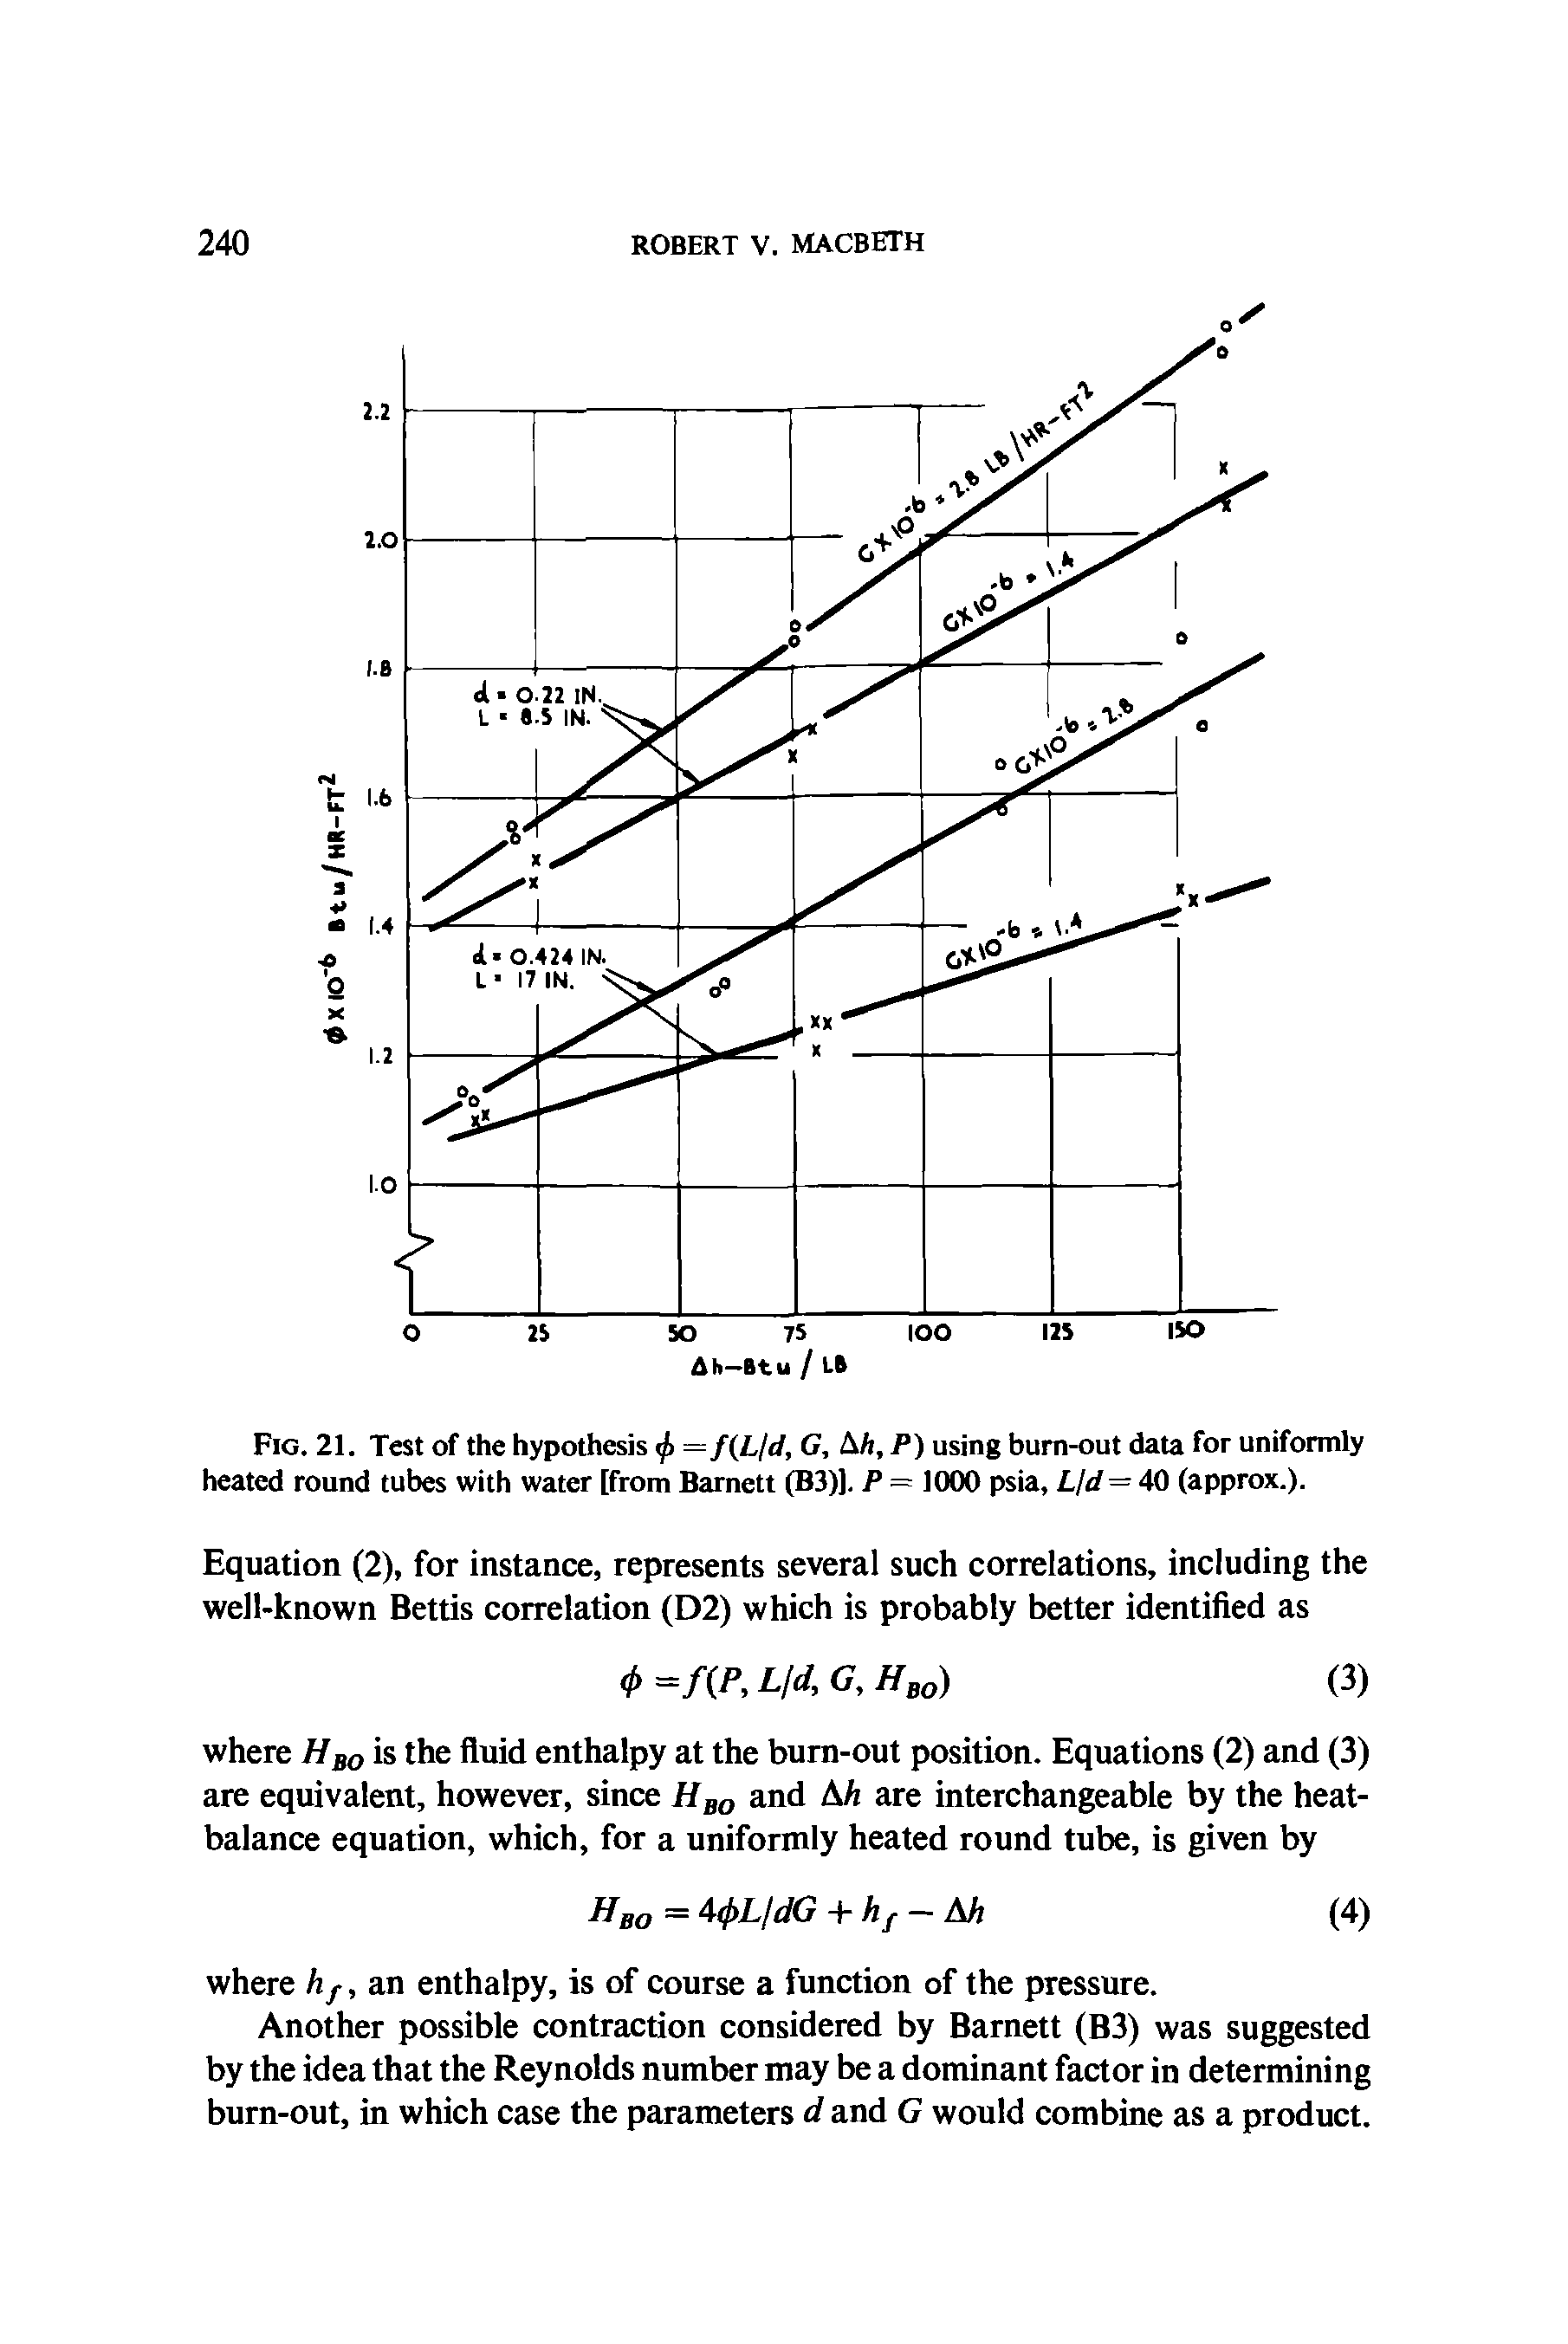 Fig. 21. Test of the hypothesis = f(L/d, G, Ah, P) using burn-out data for uniformly heated round tubes with water [from Barnett (B3)]. P = 1000 psia, Lid = 40 (approx.).